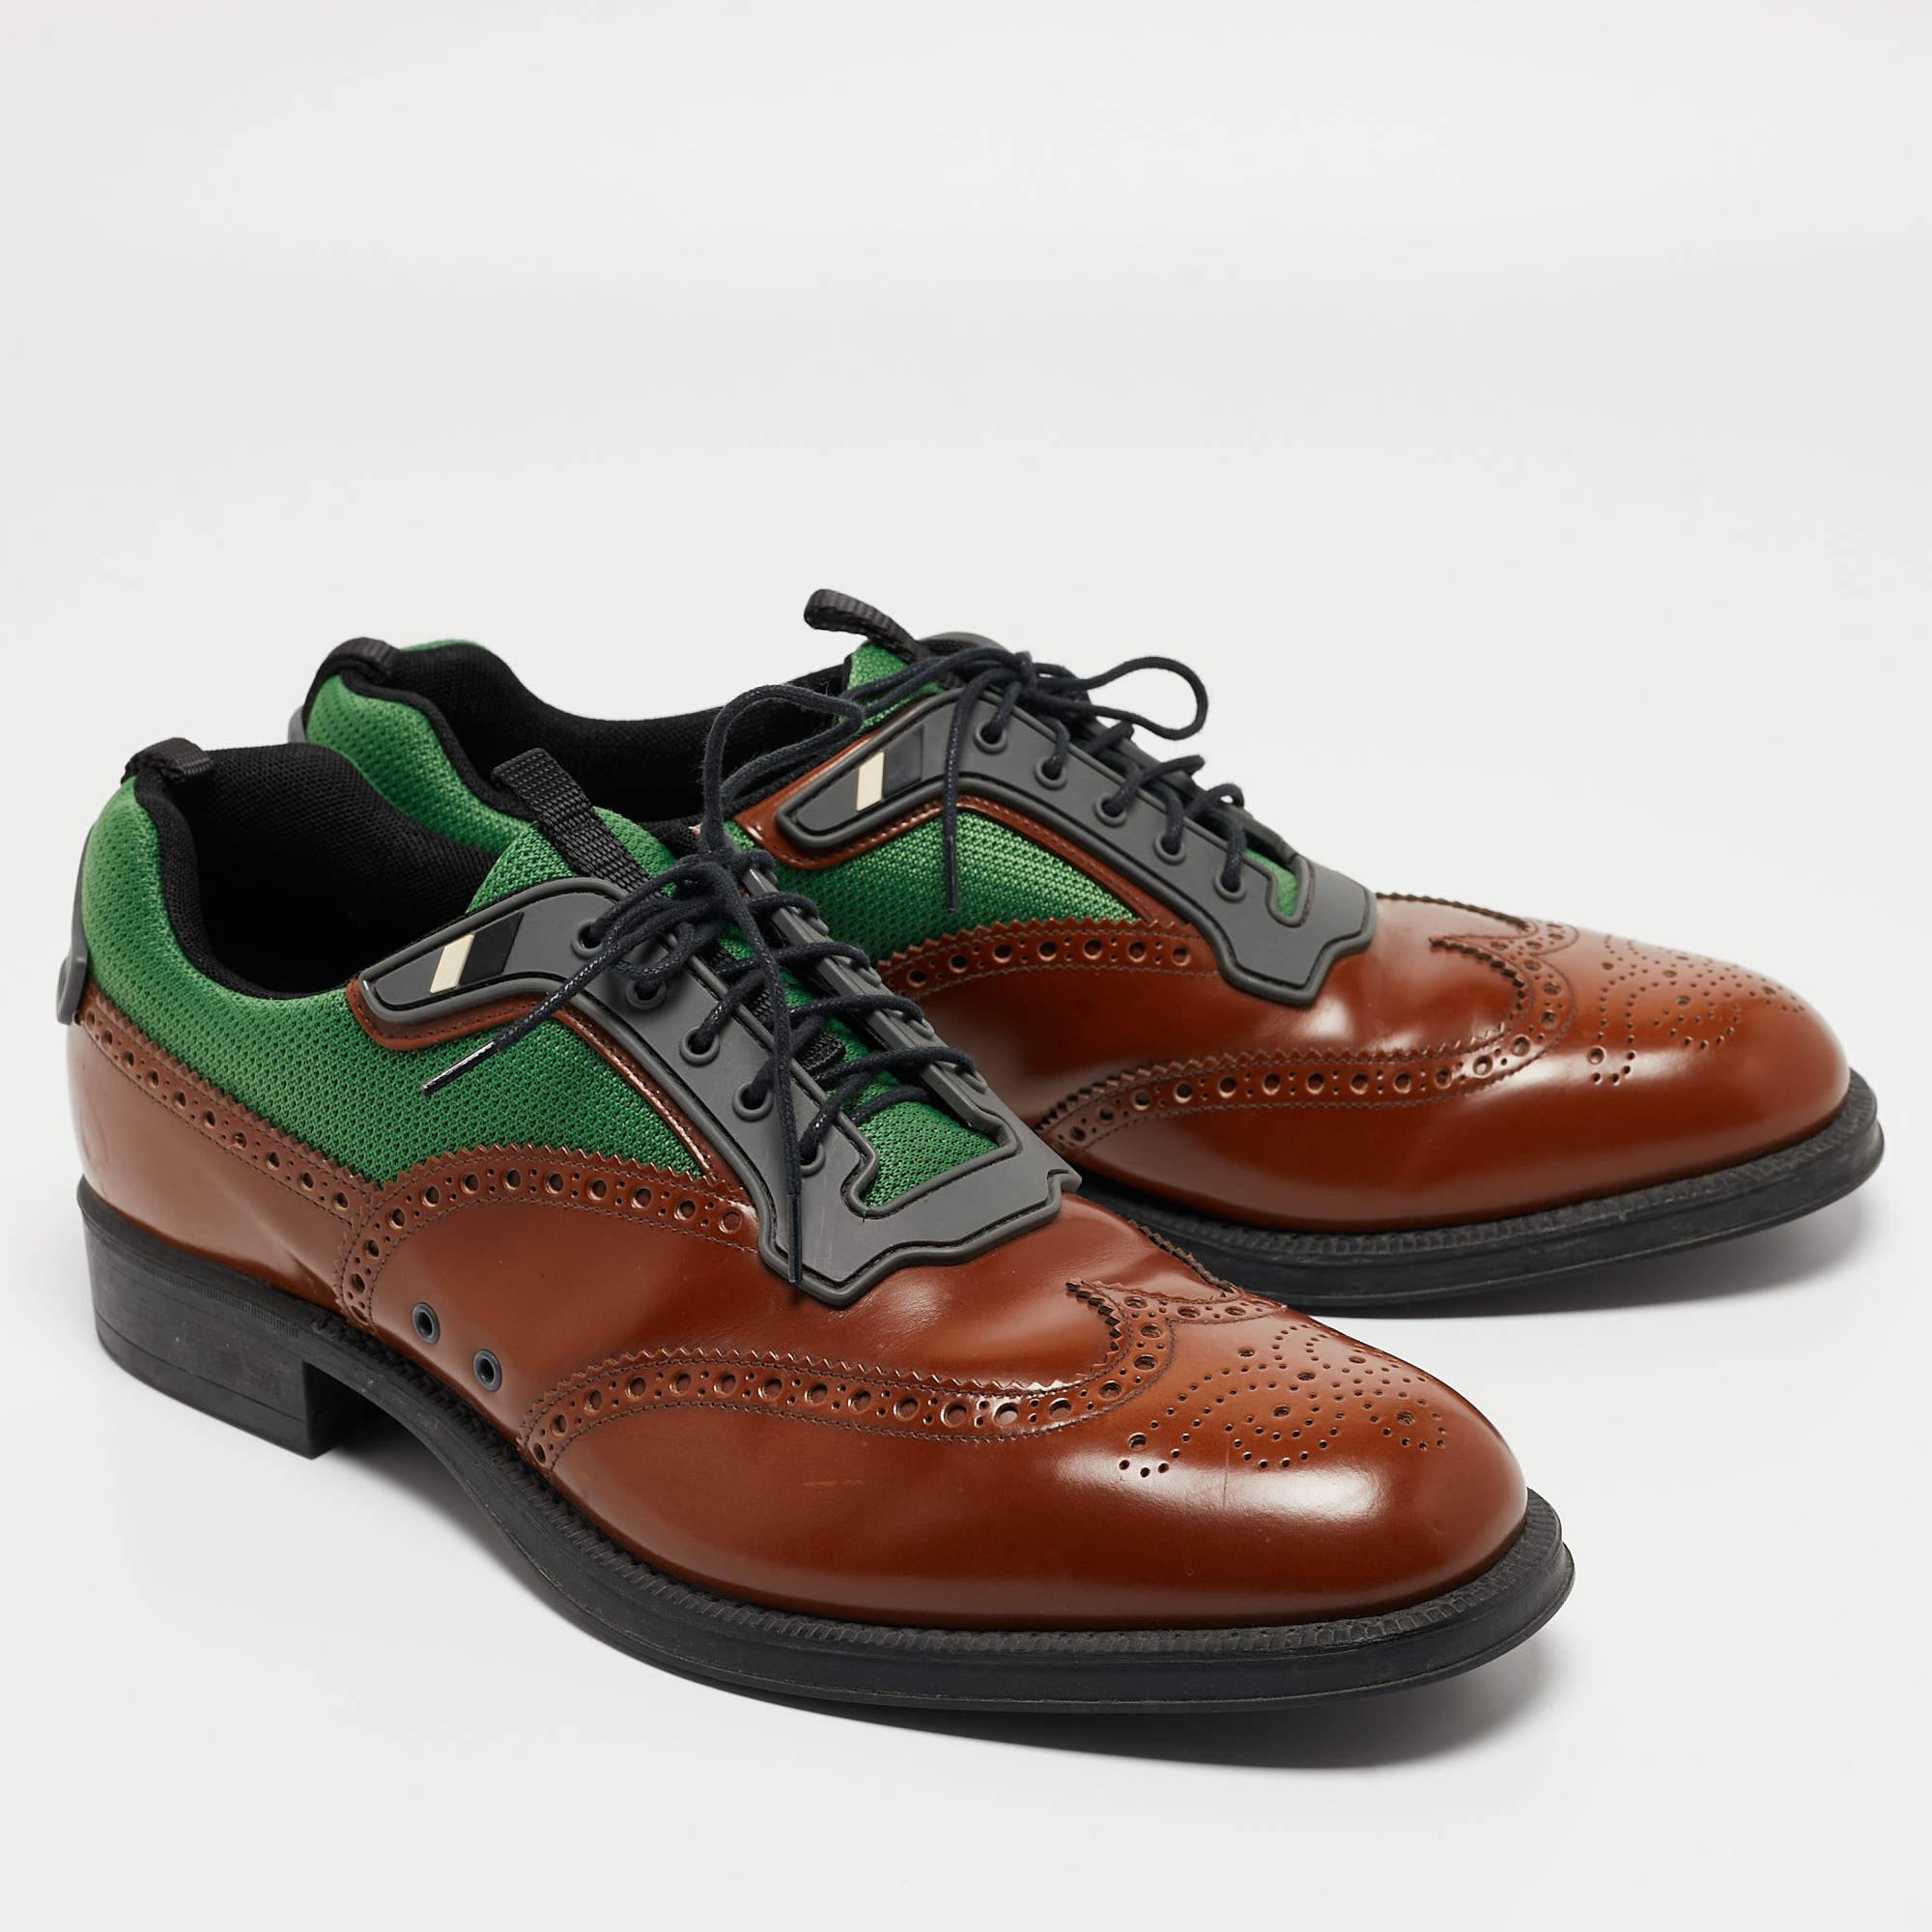 Black Prada Tricolor Brogue Leather and Mesh Lace Up Oxfords Size 45